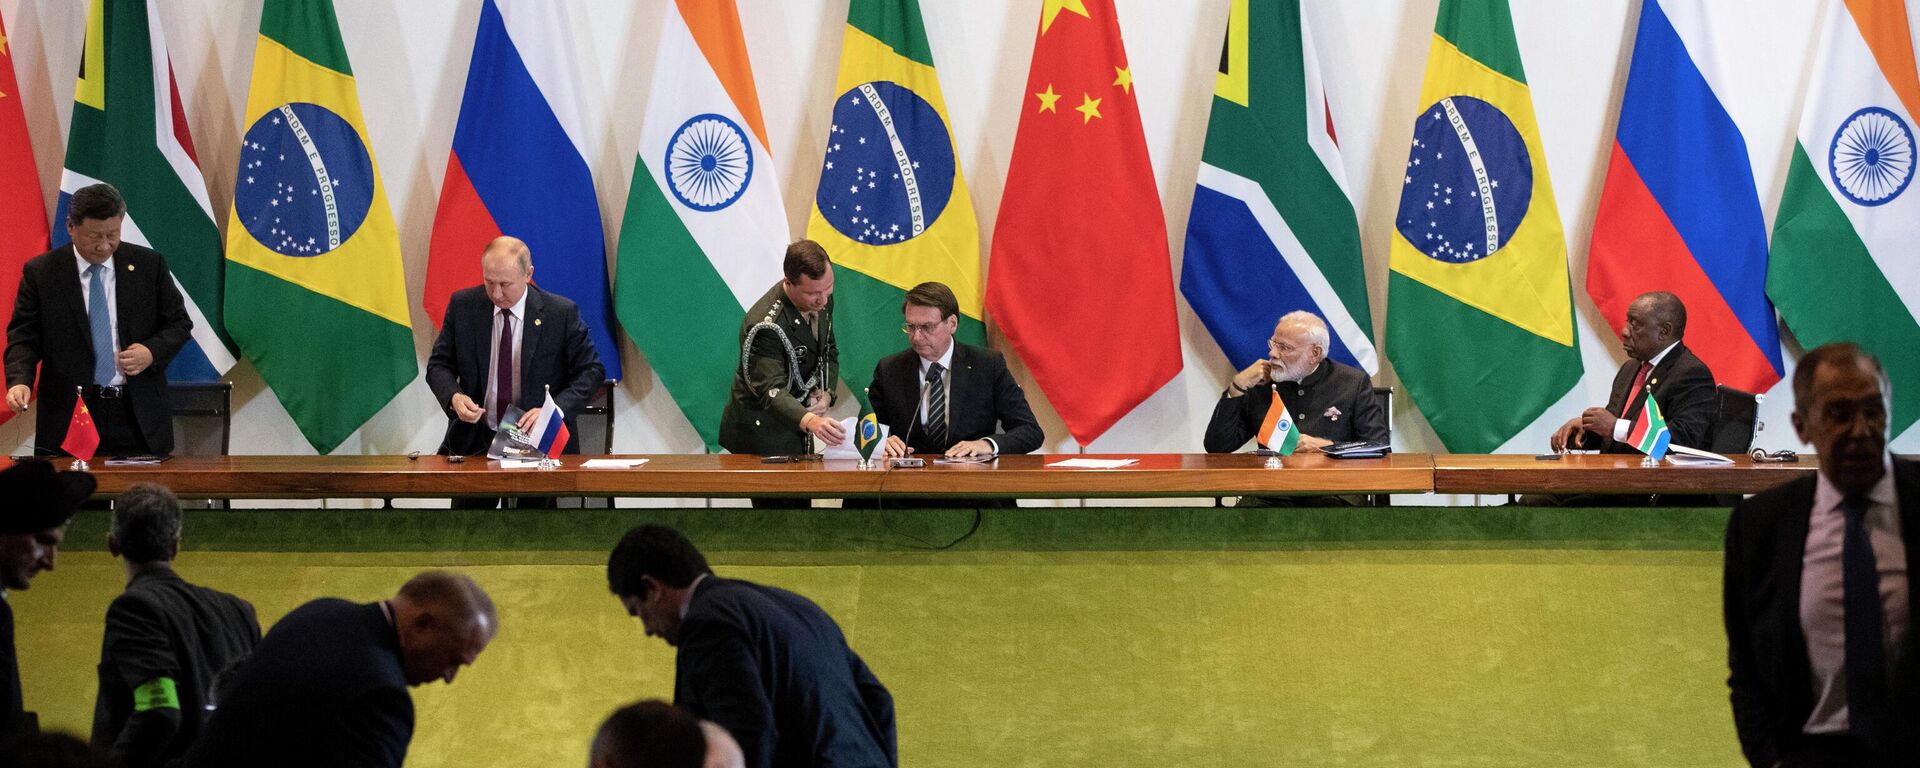 China's President Xi Jinping (L), Russia's President Vladimir Putin (2nd L), Brazil's President Jair Bolsonaro (C), India's Prime Minister Narendra Modi (2nd R), and South Africa's President Cyril Ramaphosa (R) attend to a meeting with members of the Business Council and management of the New Development Bank during the BRICS Summit in Brasilia, November 14, 2019. (Photo by Pavel Golovkin / POOL / AFP) - Sputnik International, 1920, 25.06.2022